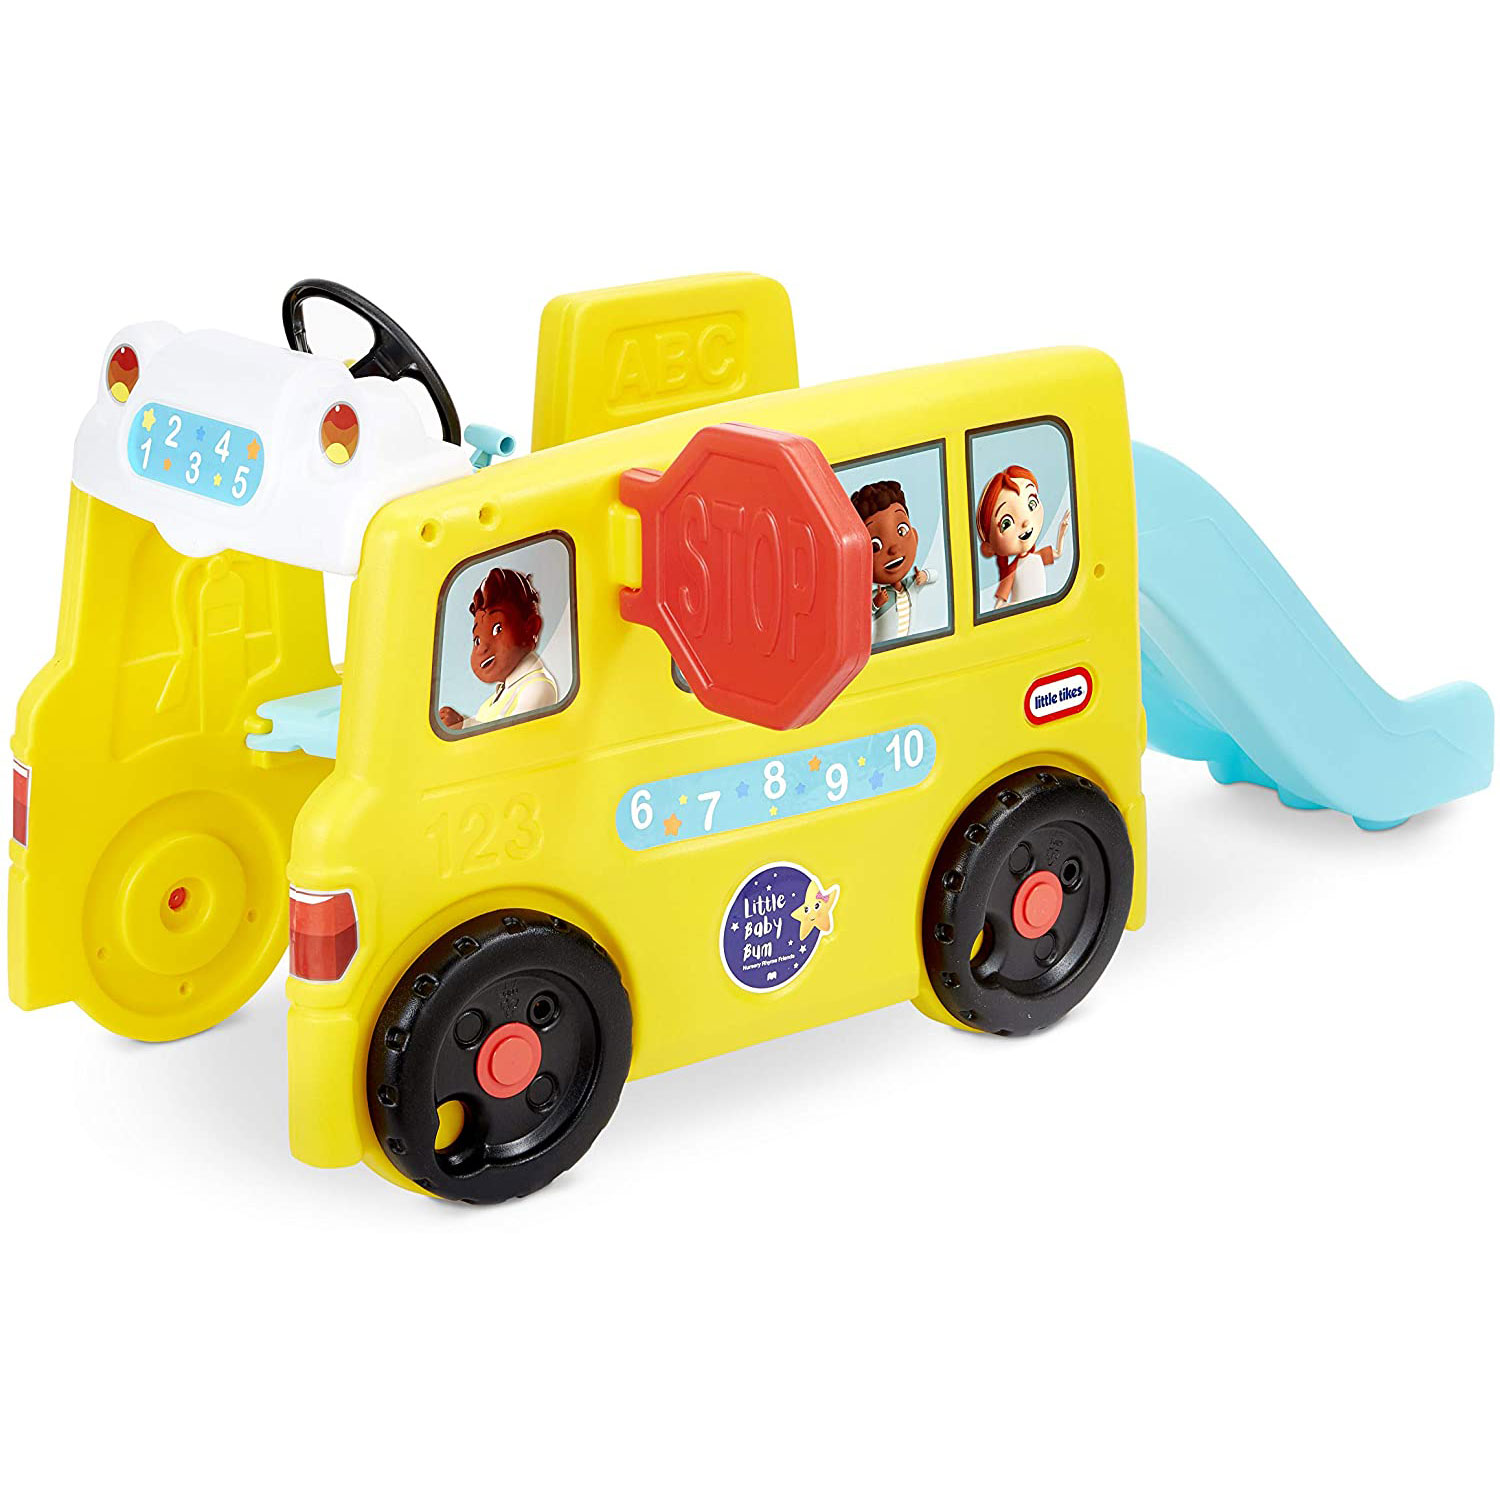 Little Tikes Baby Bum Wheels on the Bus Climber and Slide with Interactive Music - image 1 of 9